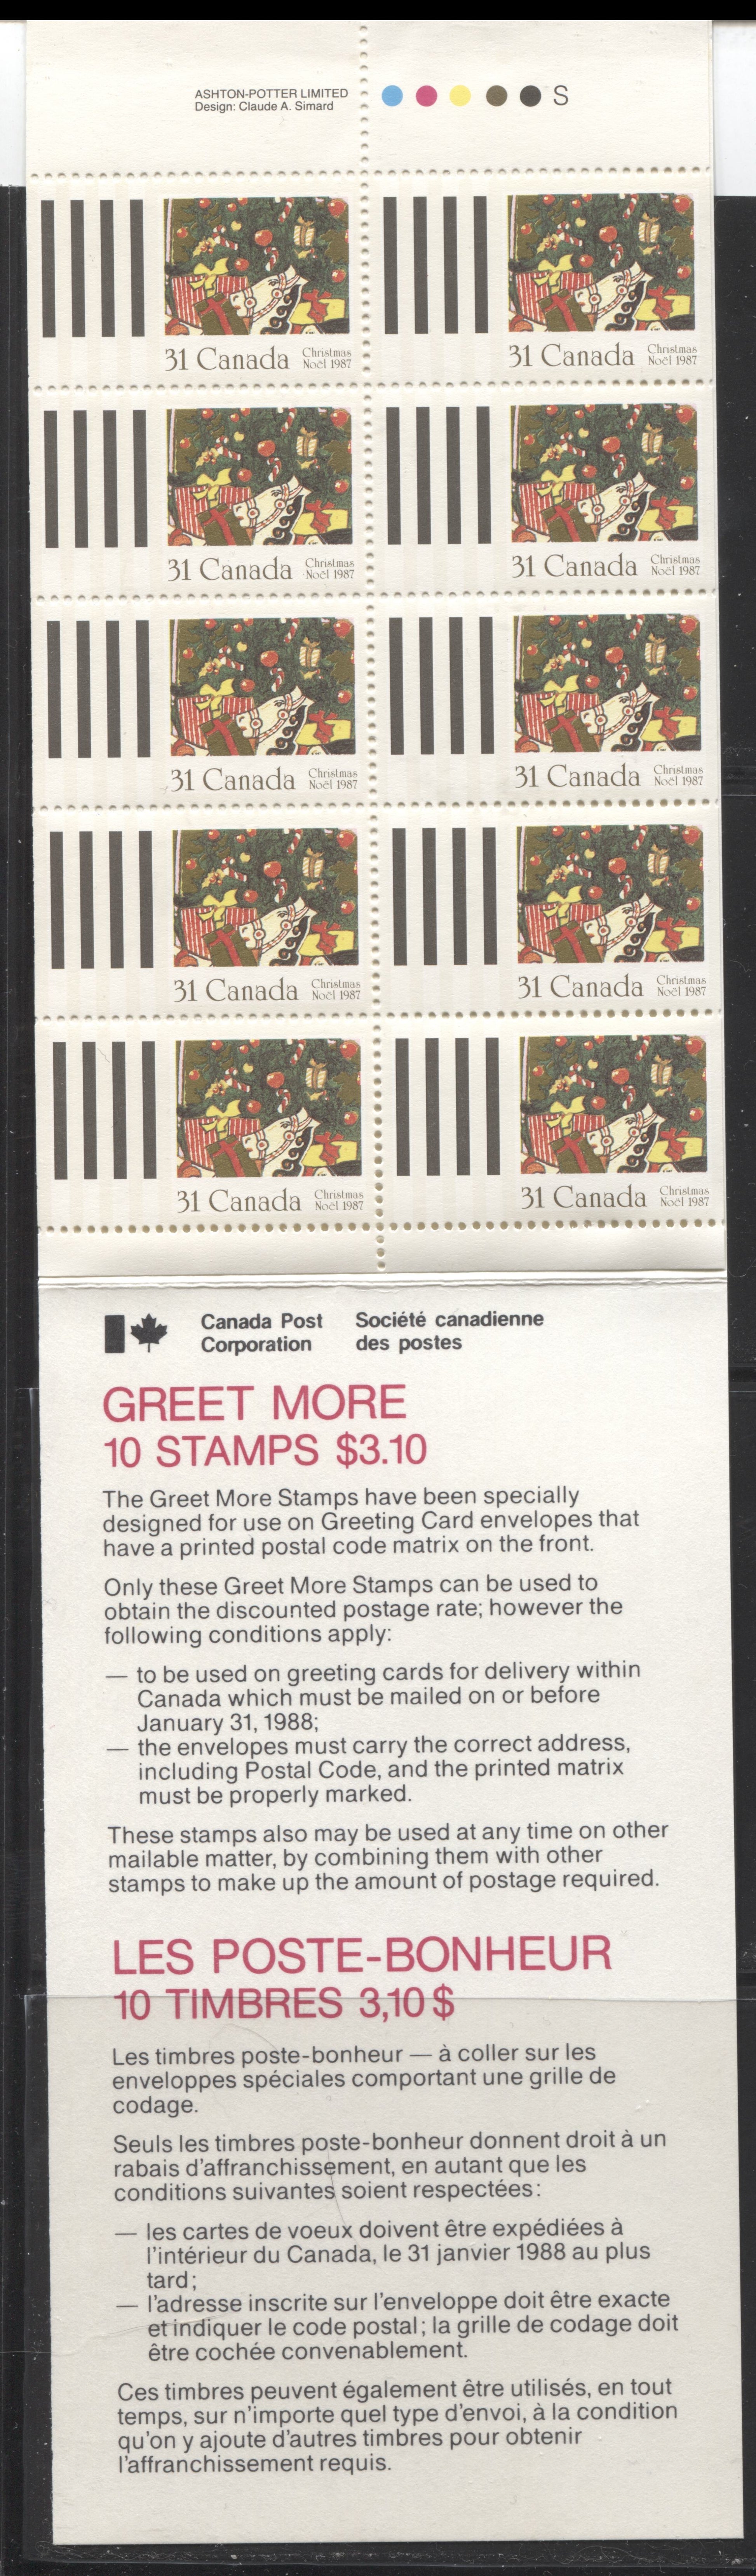 Canada #BK95a-c 1987 Christmas Issue, Complete $3.10 Booklet, Coated Slater Paper, Dull Paper, 4 mm GT-4 Tagging & 3-4 Extra Bars at Left Brixton Chrome 